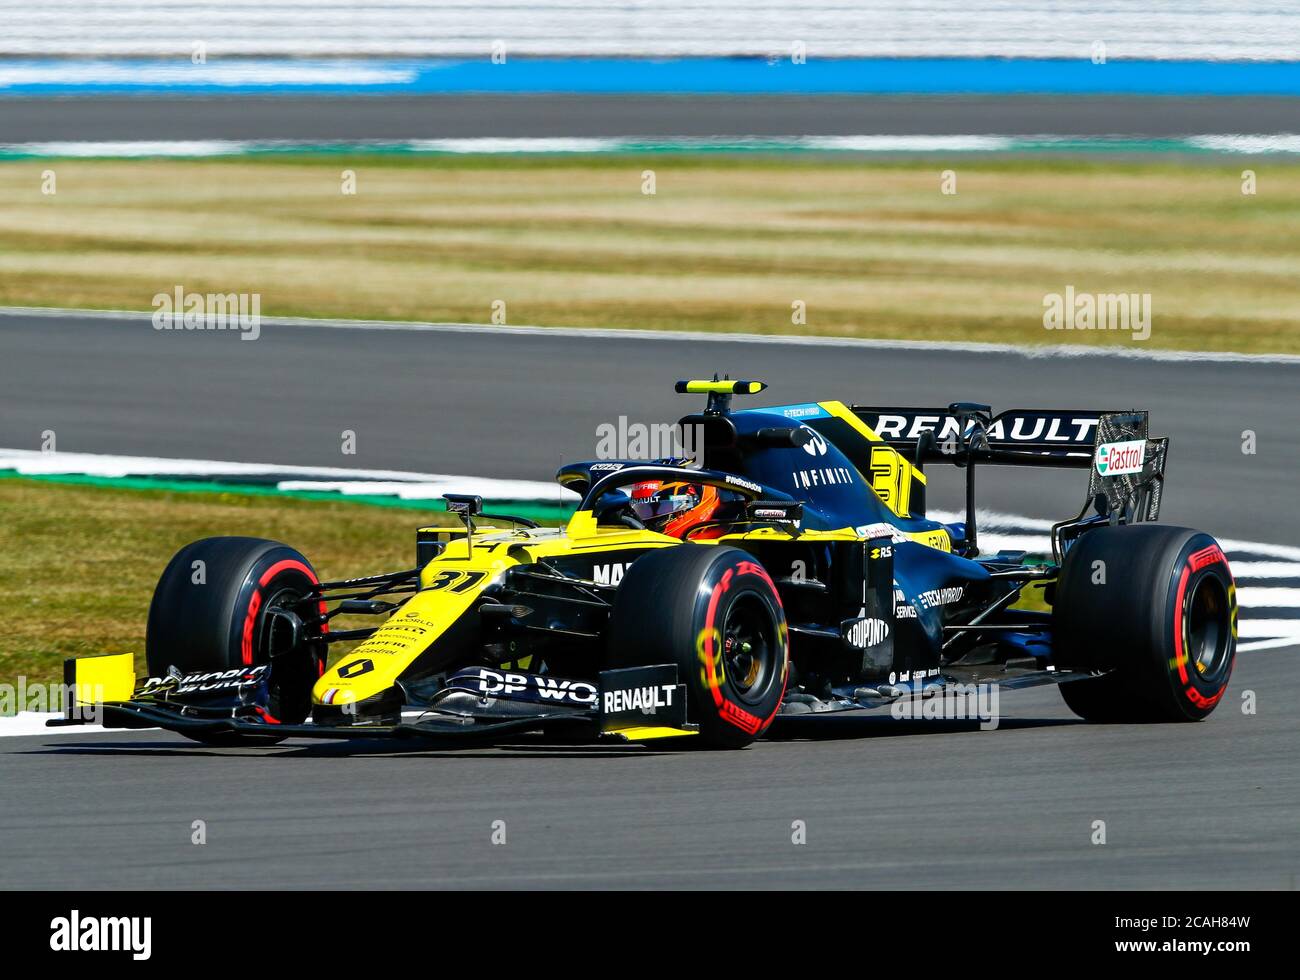 Renault's Esteban Ocon during the first practice session of the 70th Anniversary Formula One Grand Prix at Silverstone Race circuit, Northampton. Stock Photo